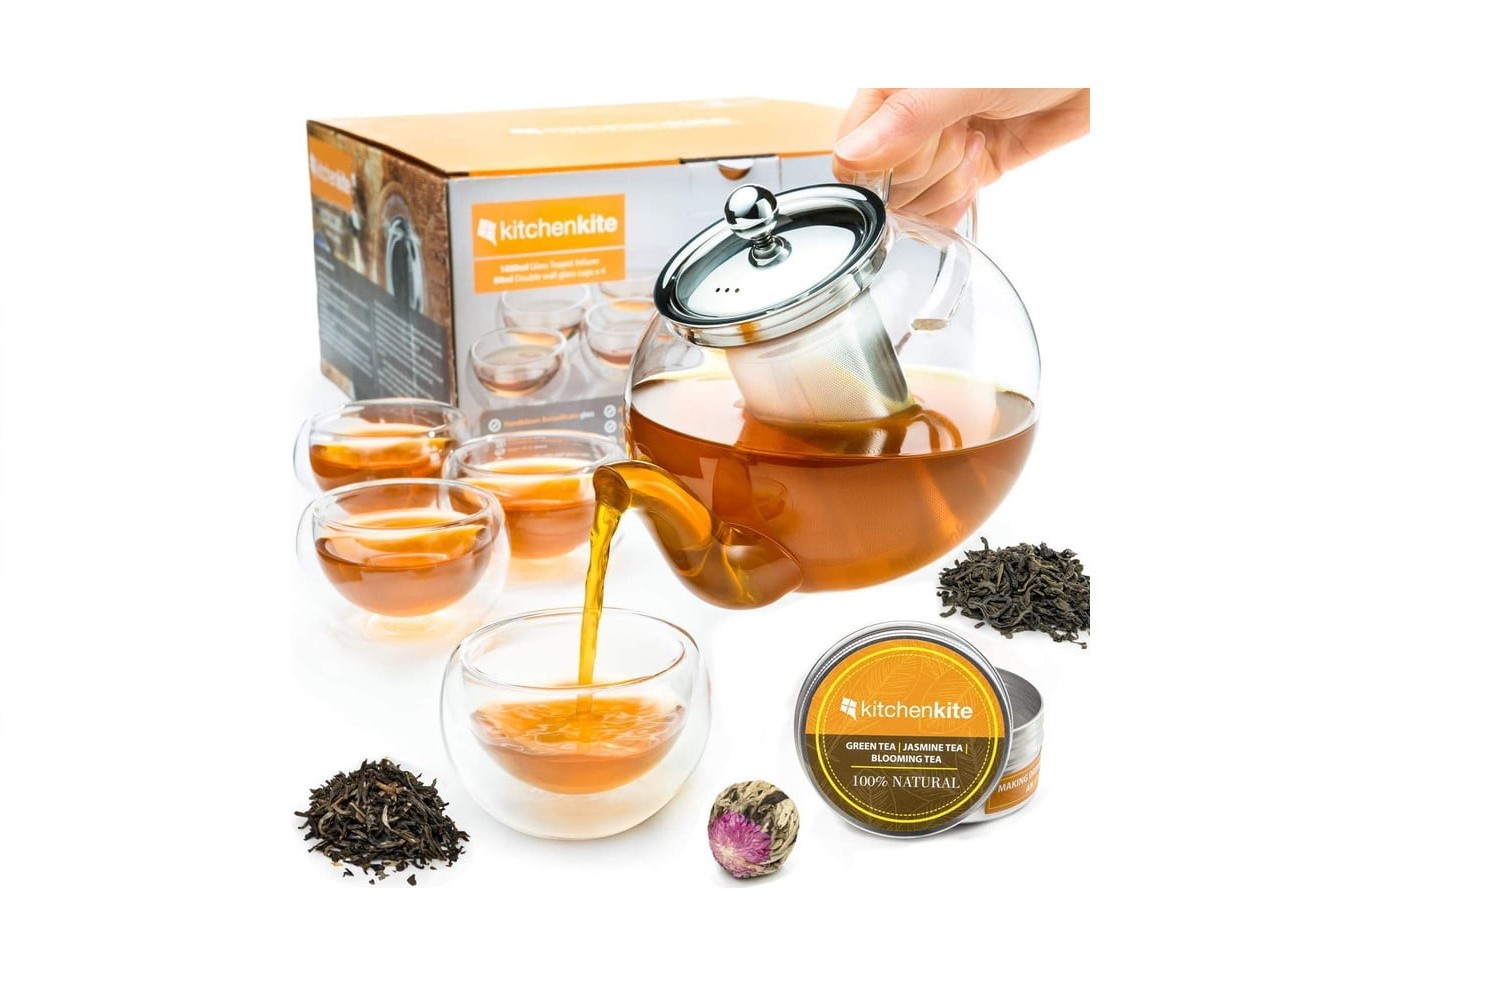 https://www.themanual.com/wp-content/uploads/sites/9/2021/12/kitchen-kite-tea-kettle-infuser-stovetop-gift-set.jpg?fit=800%2C800&p=1